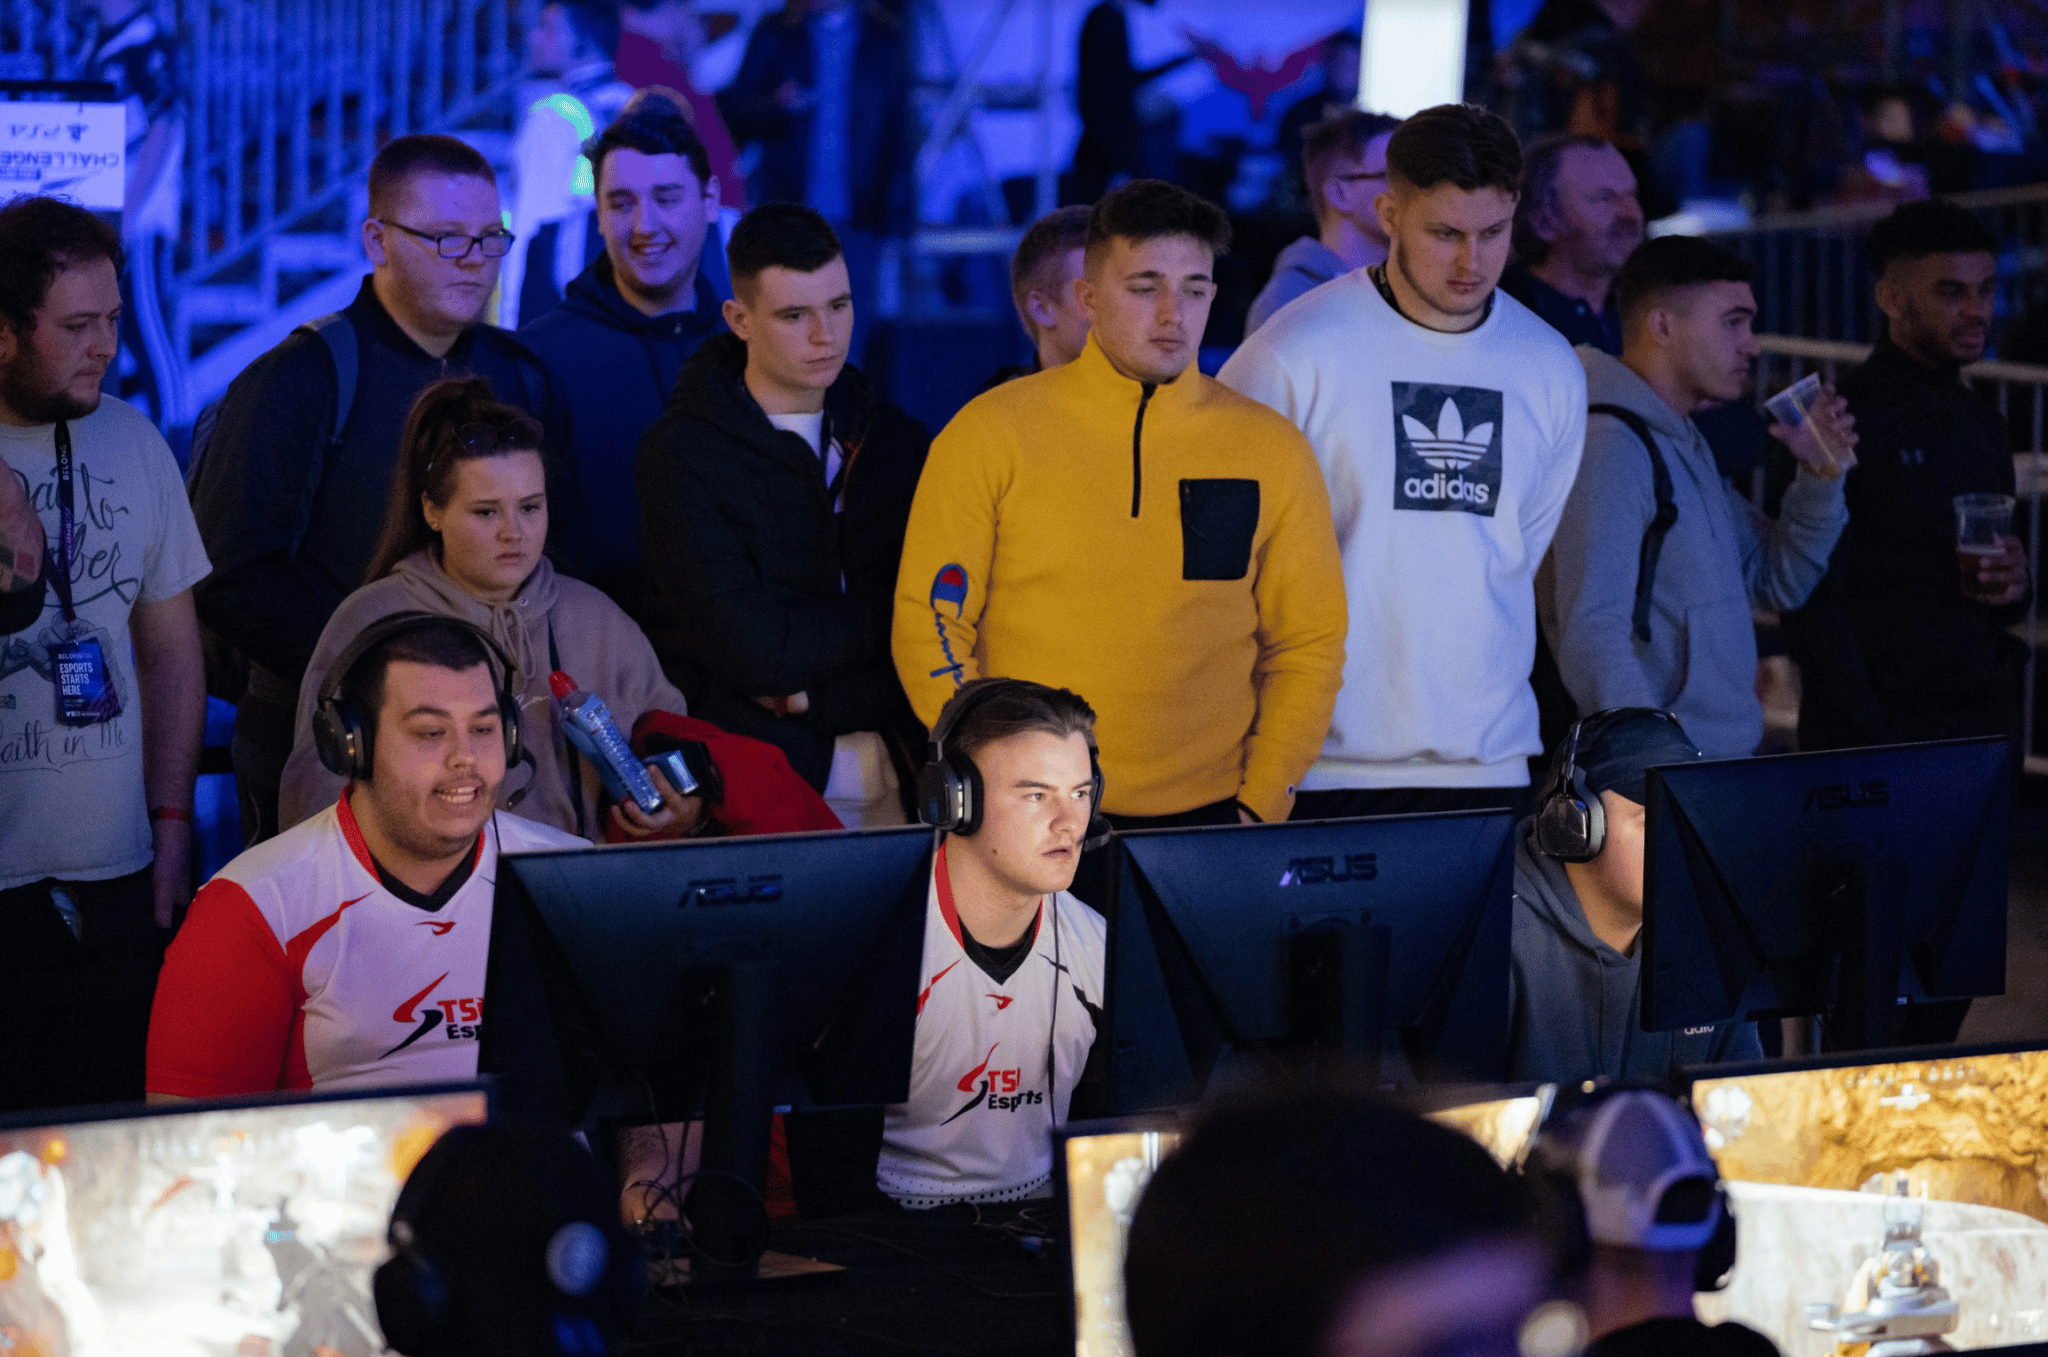 Call of Duty Challengers players at LAN event